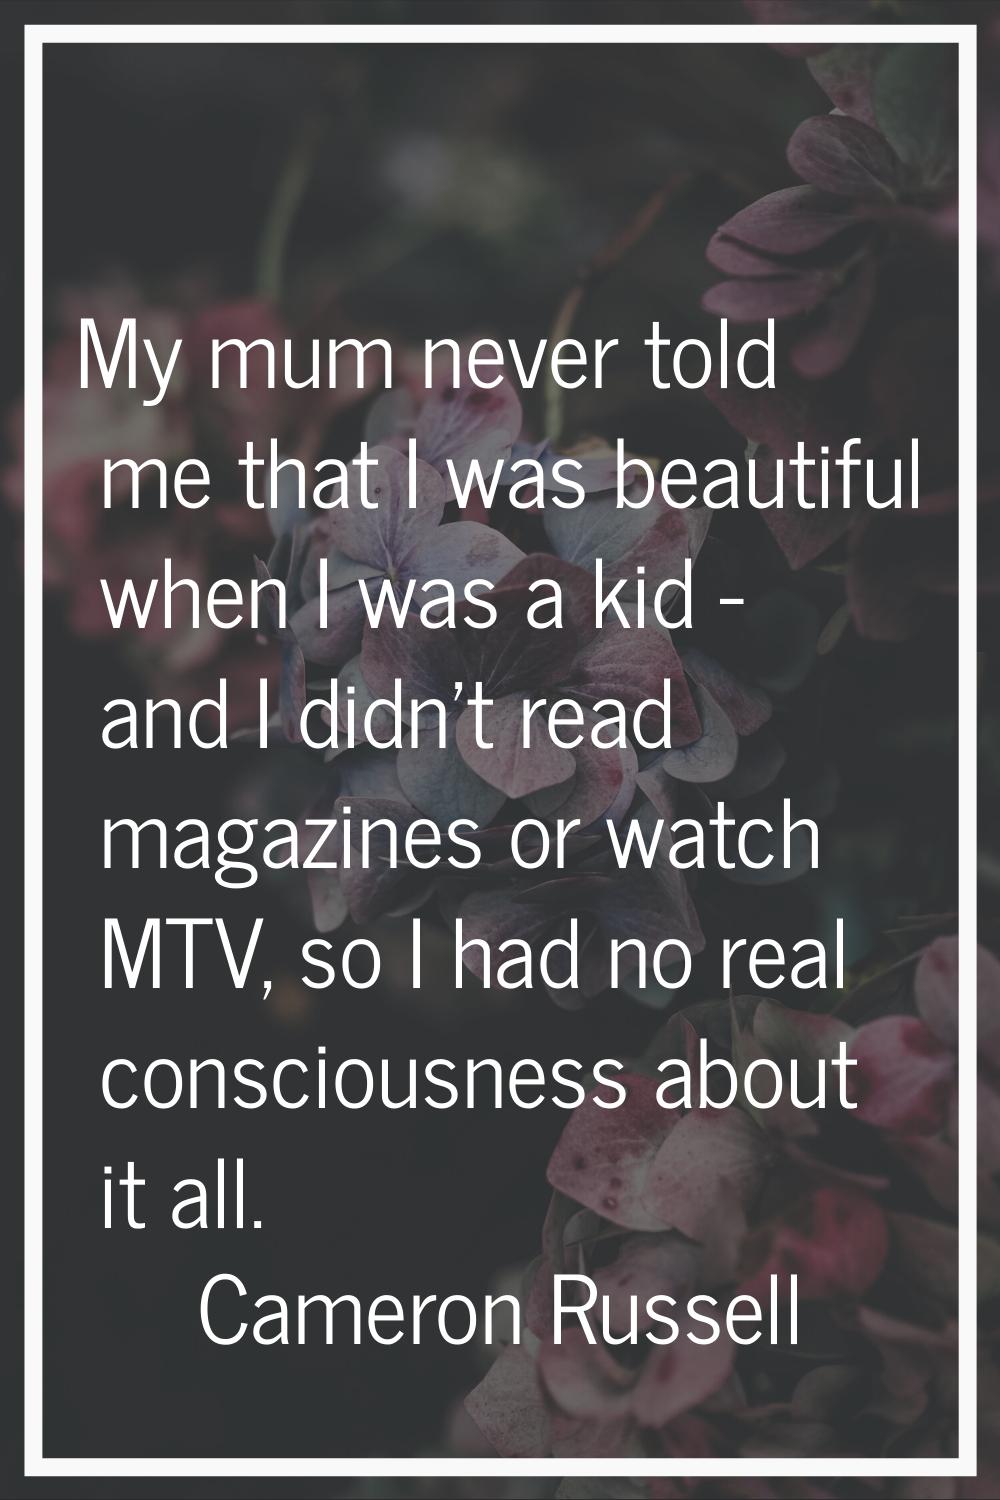 My mum never told me that I was beautiful when I was a kid - and I didn't read magazines or watch M